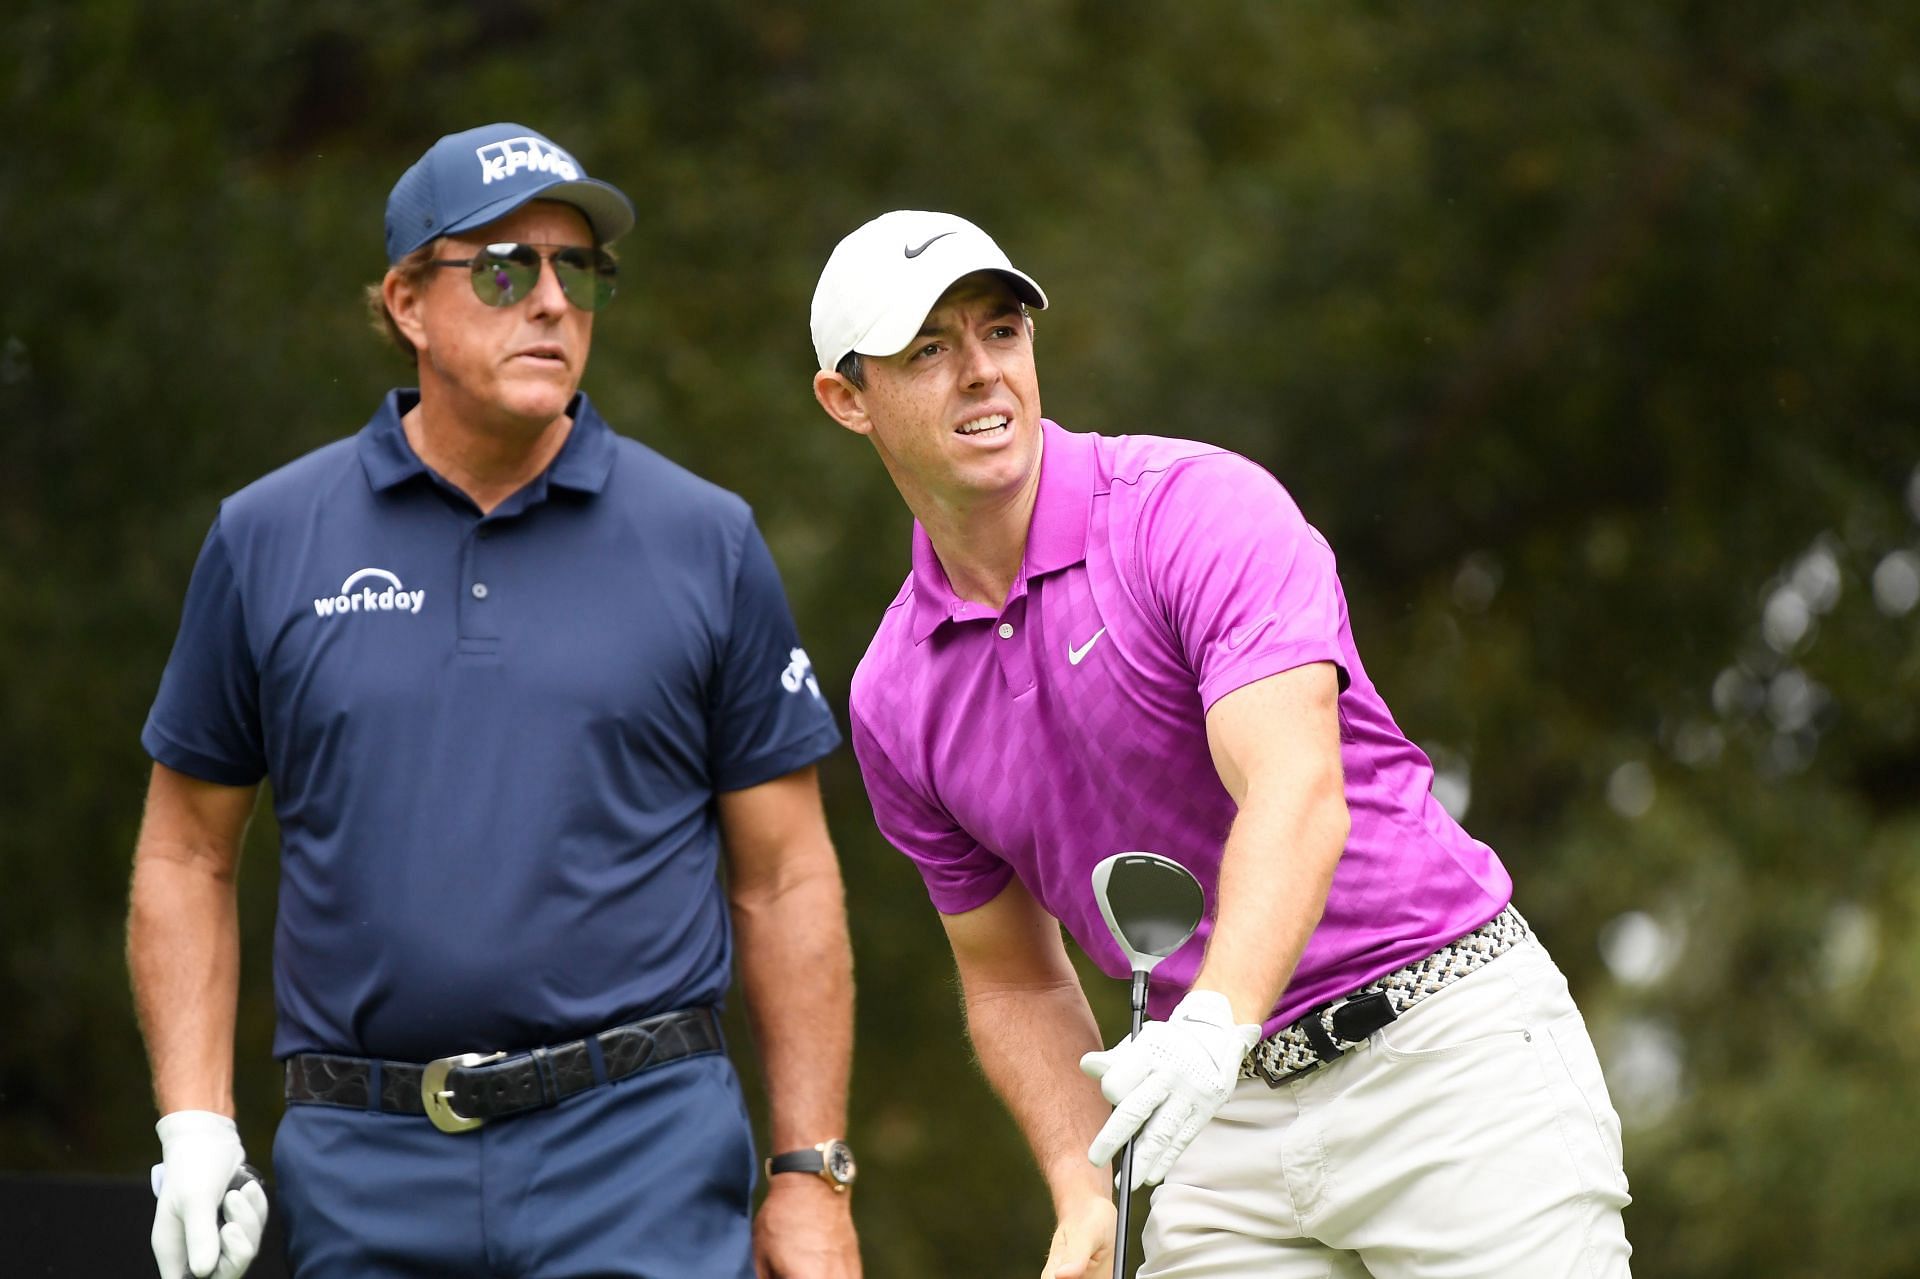 Rory McIlroy and Phil Mickelson